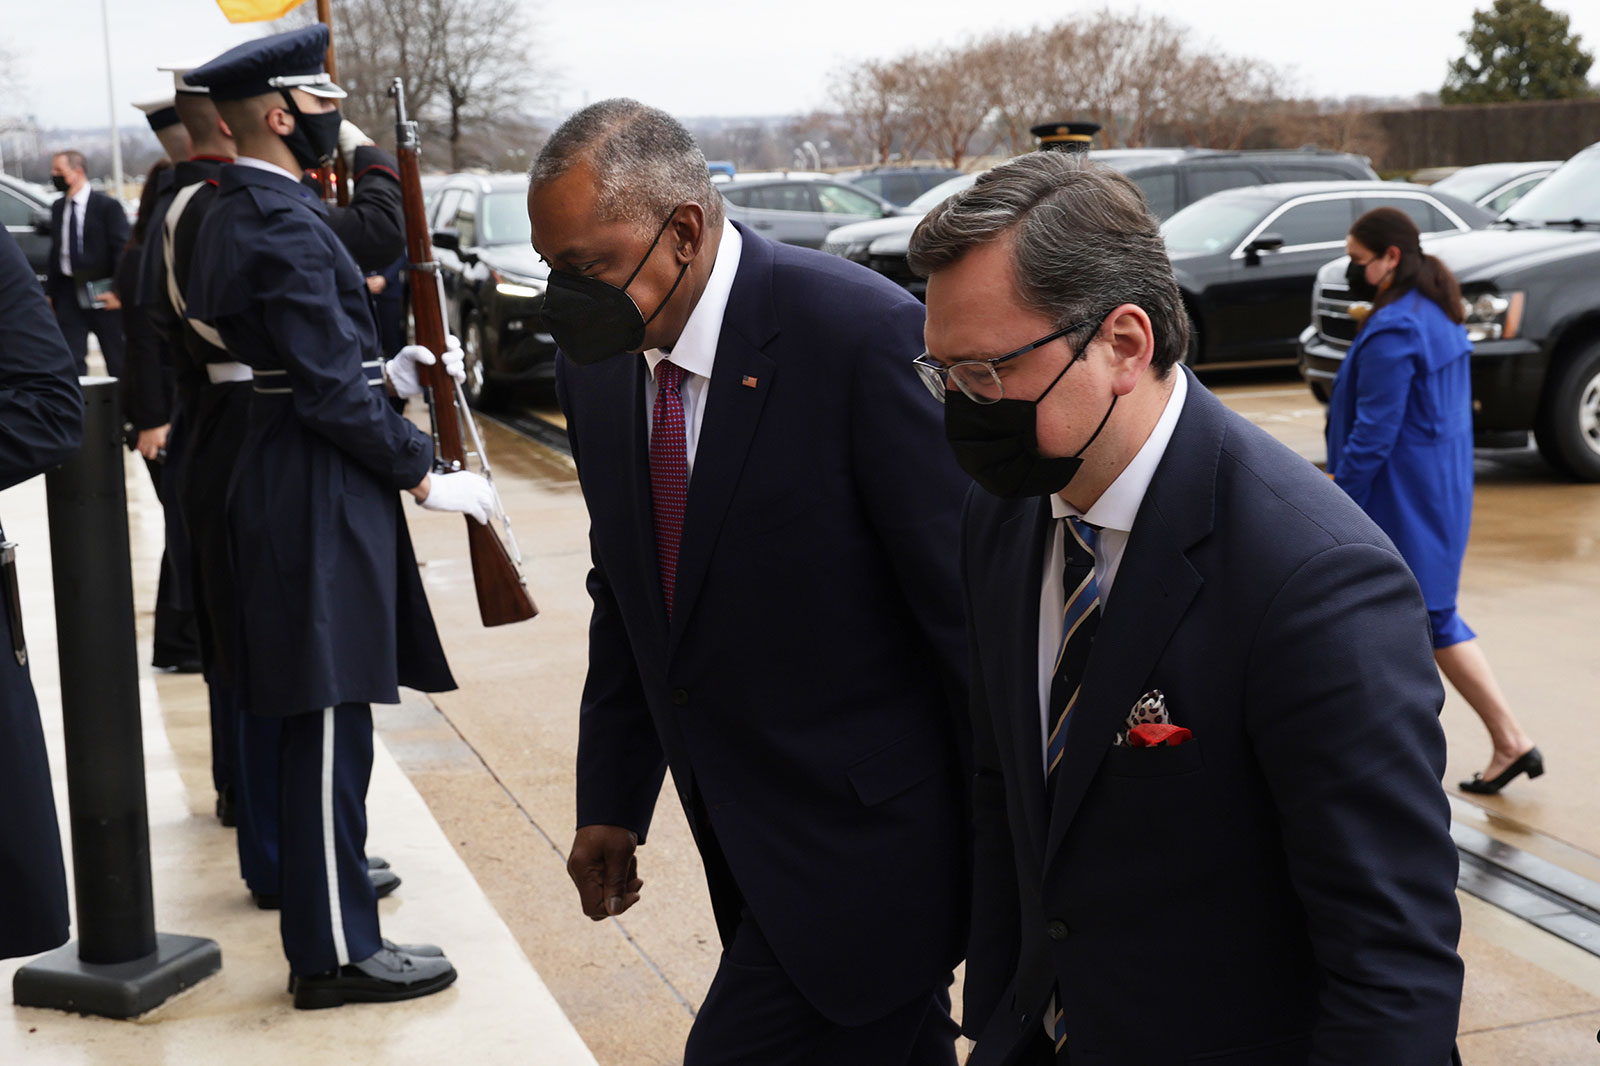 US Secretary of Defense Lloyd Austin, left, welcomes Ukrainian Foreign Minister Dmytro Kuleba before a meeting at the Pentagon on February 22.